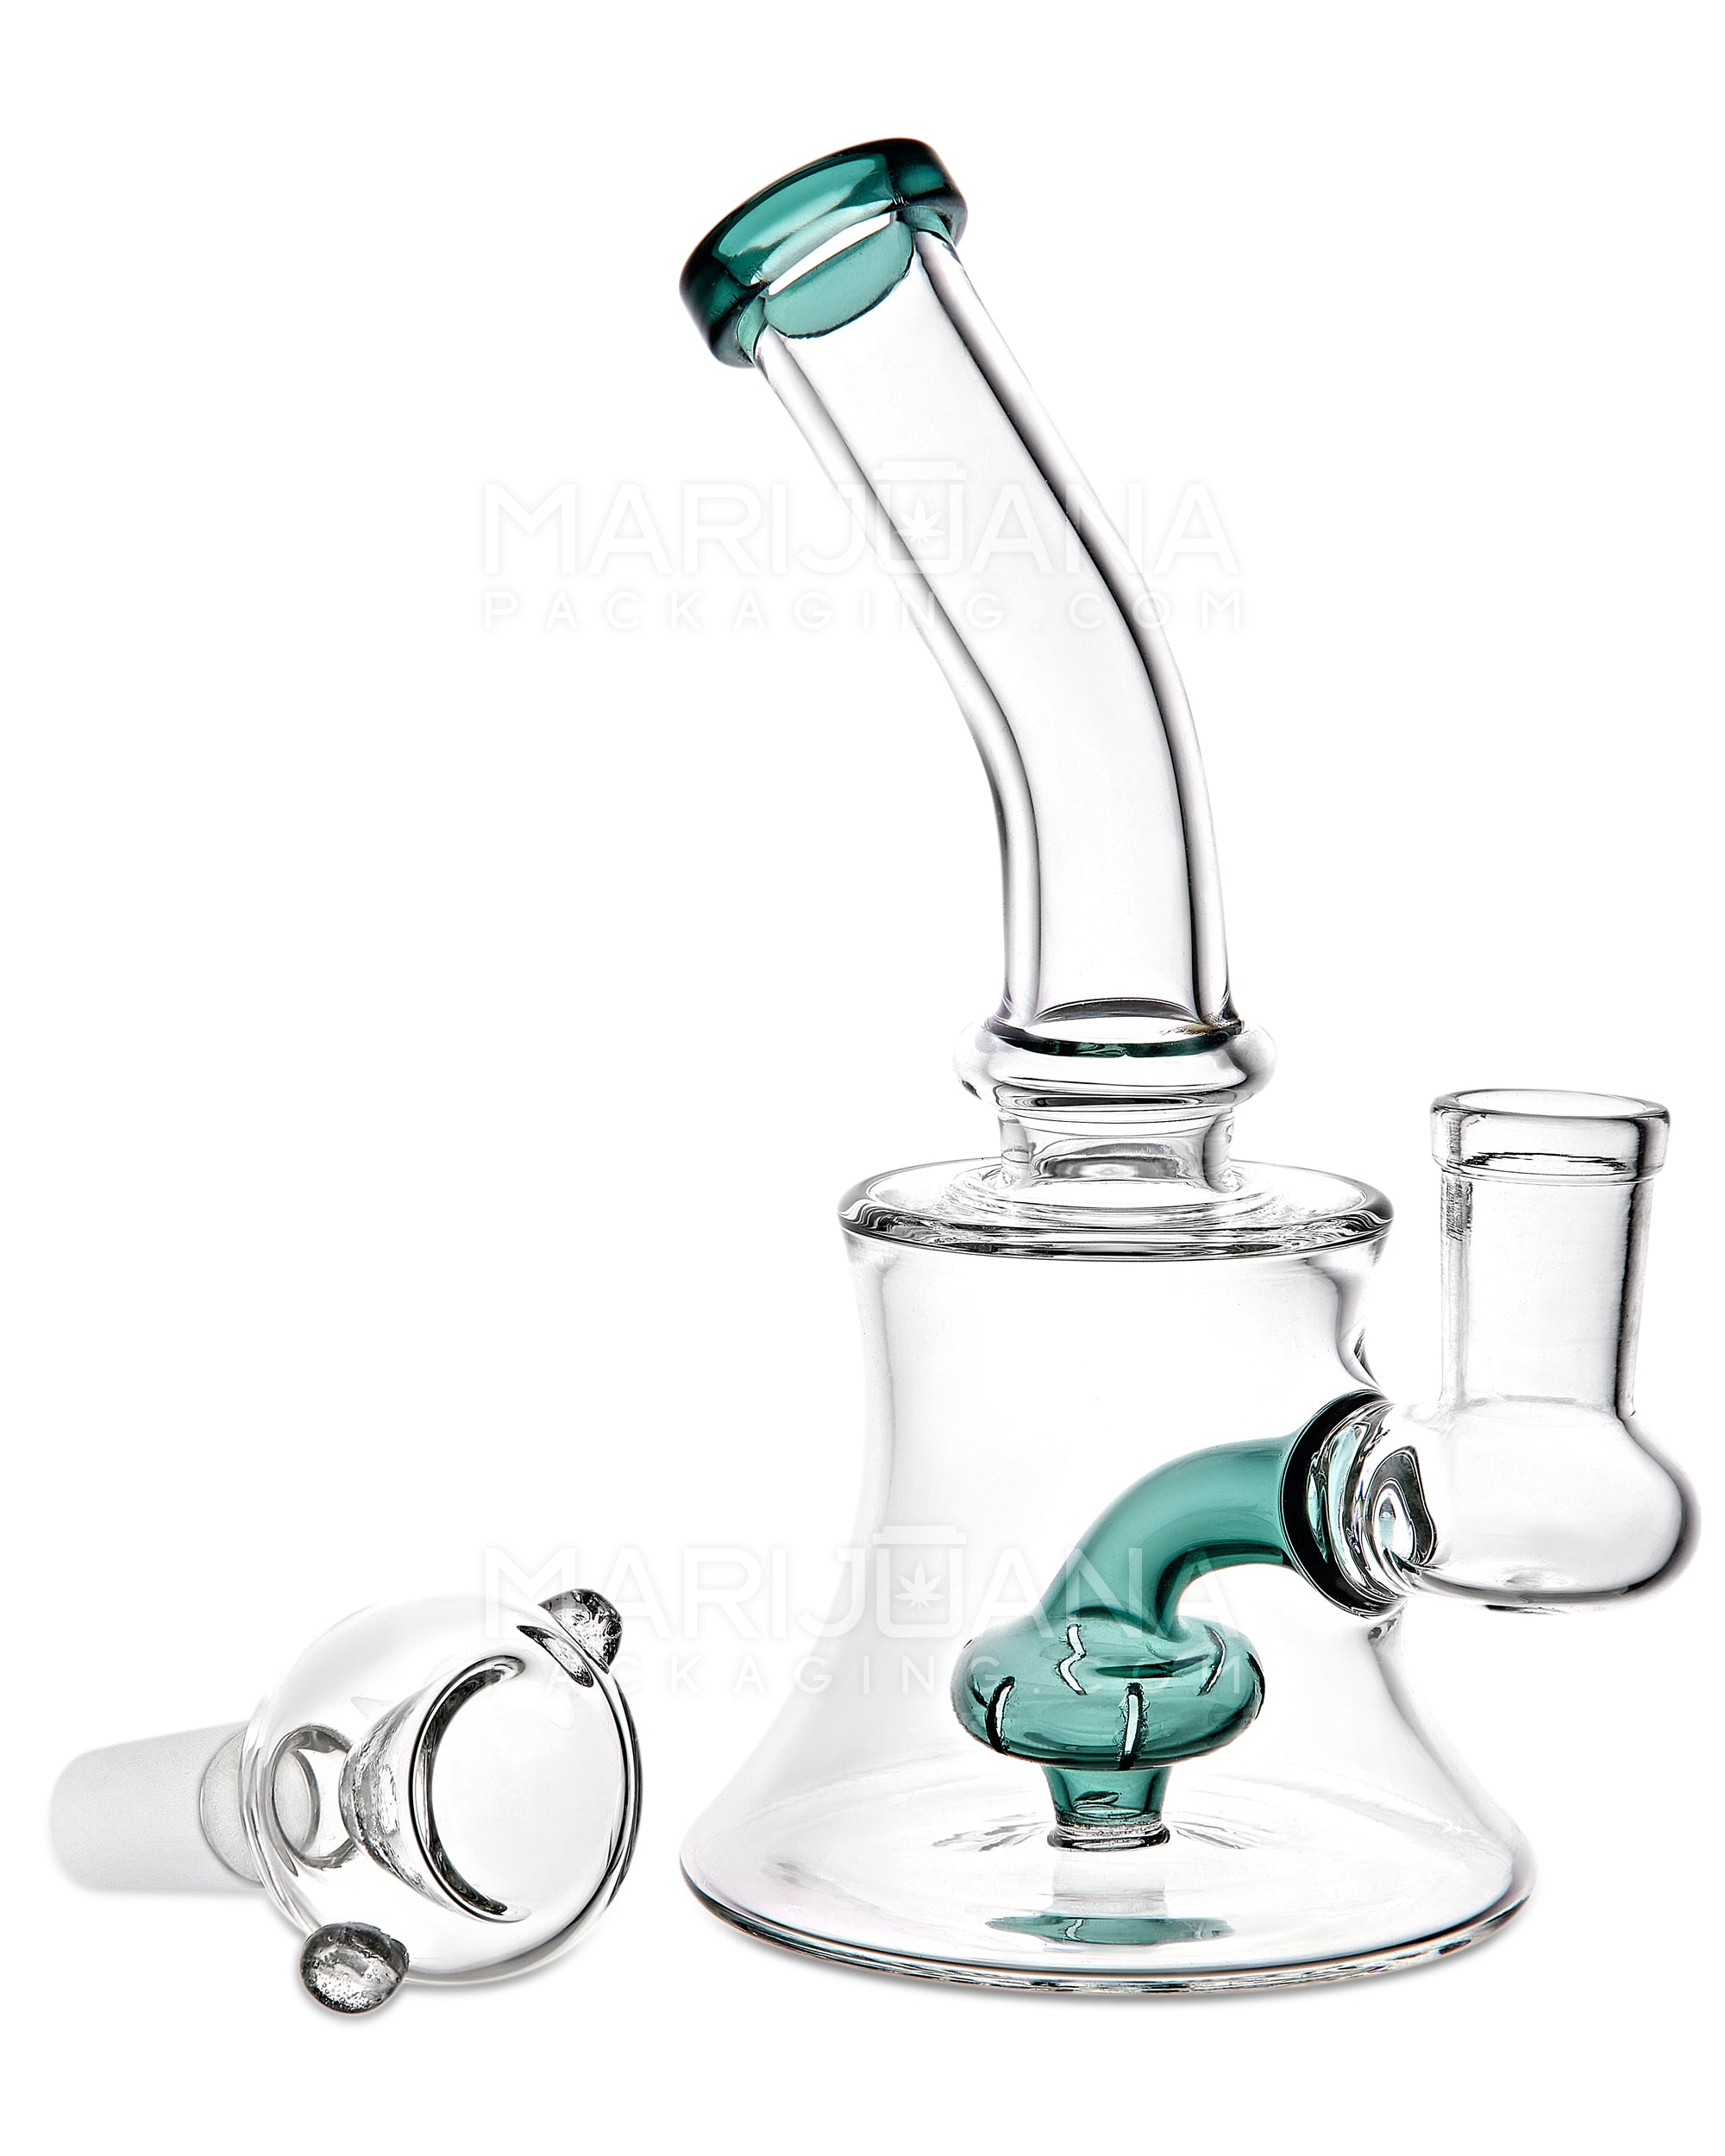 Bent Neck Showerhead Perc Glass Bell Water Pipe | 6in Tall - 14mm Bowl - Assorted - 2